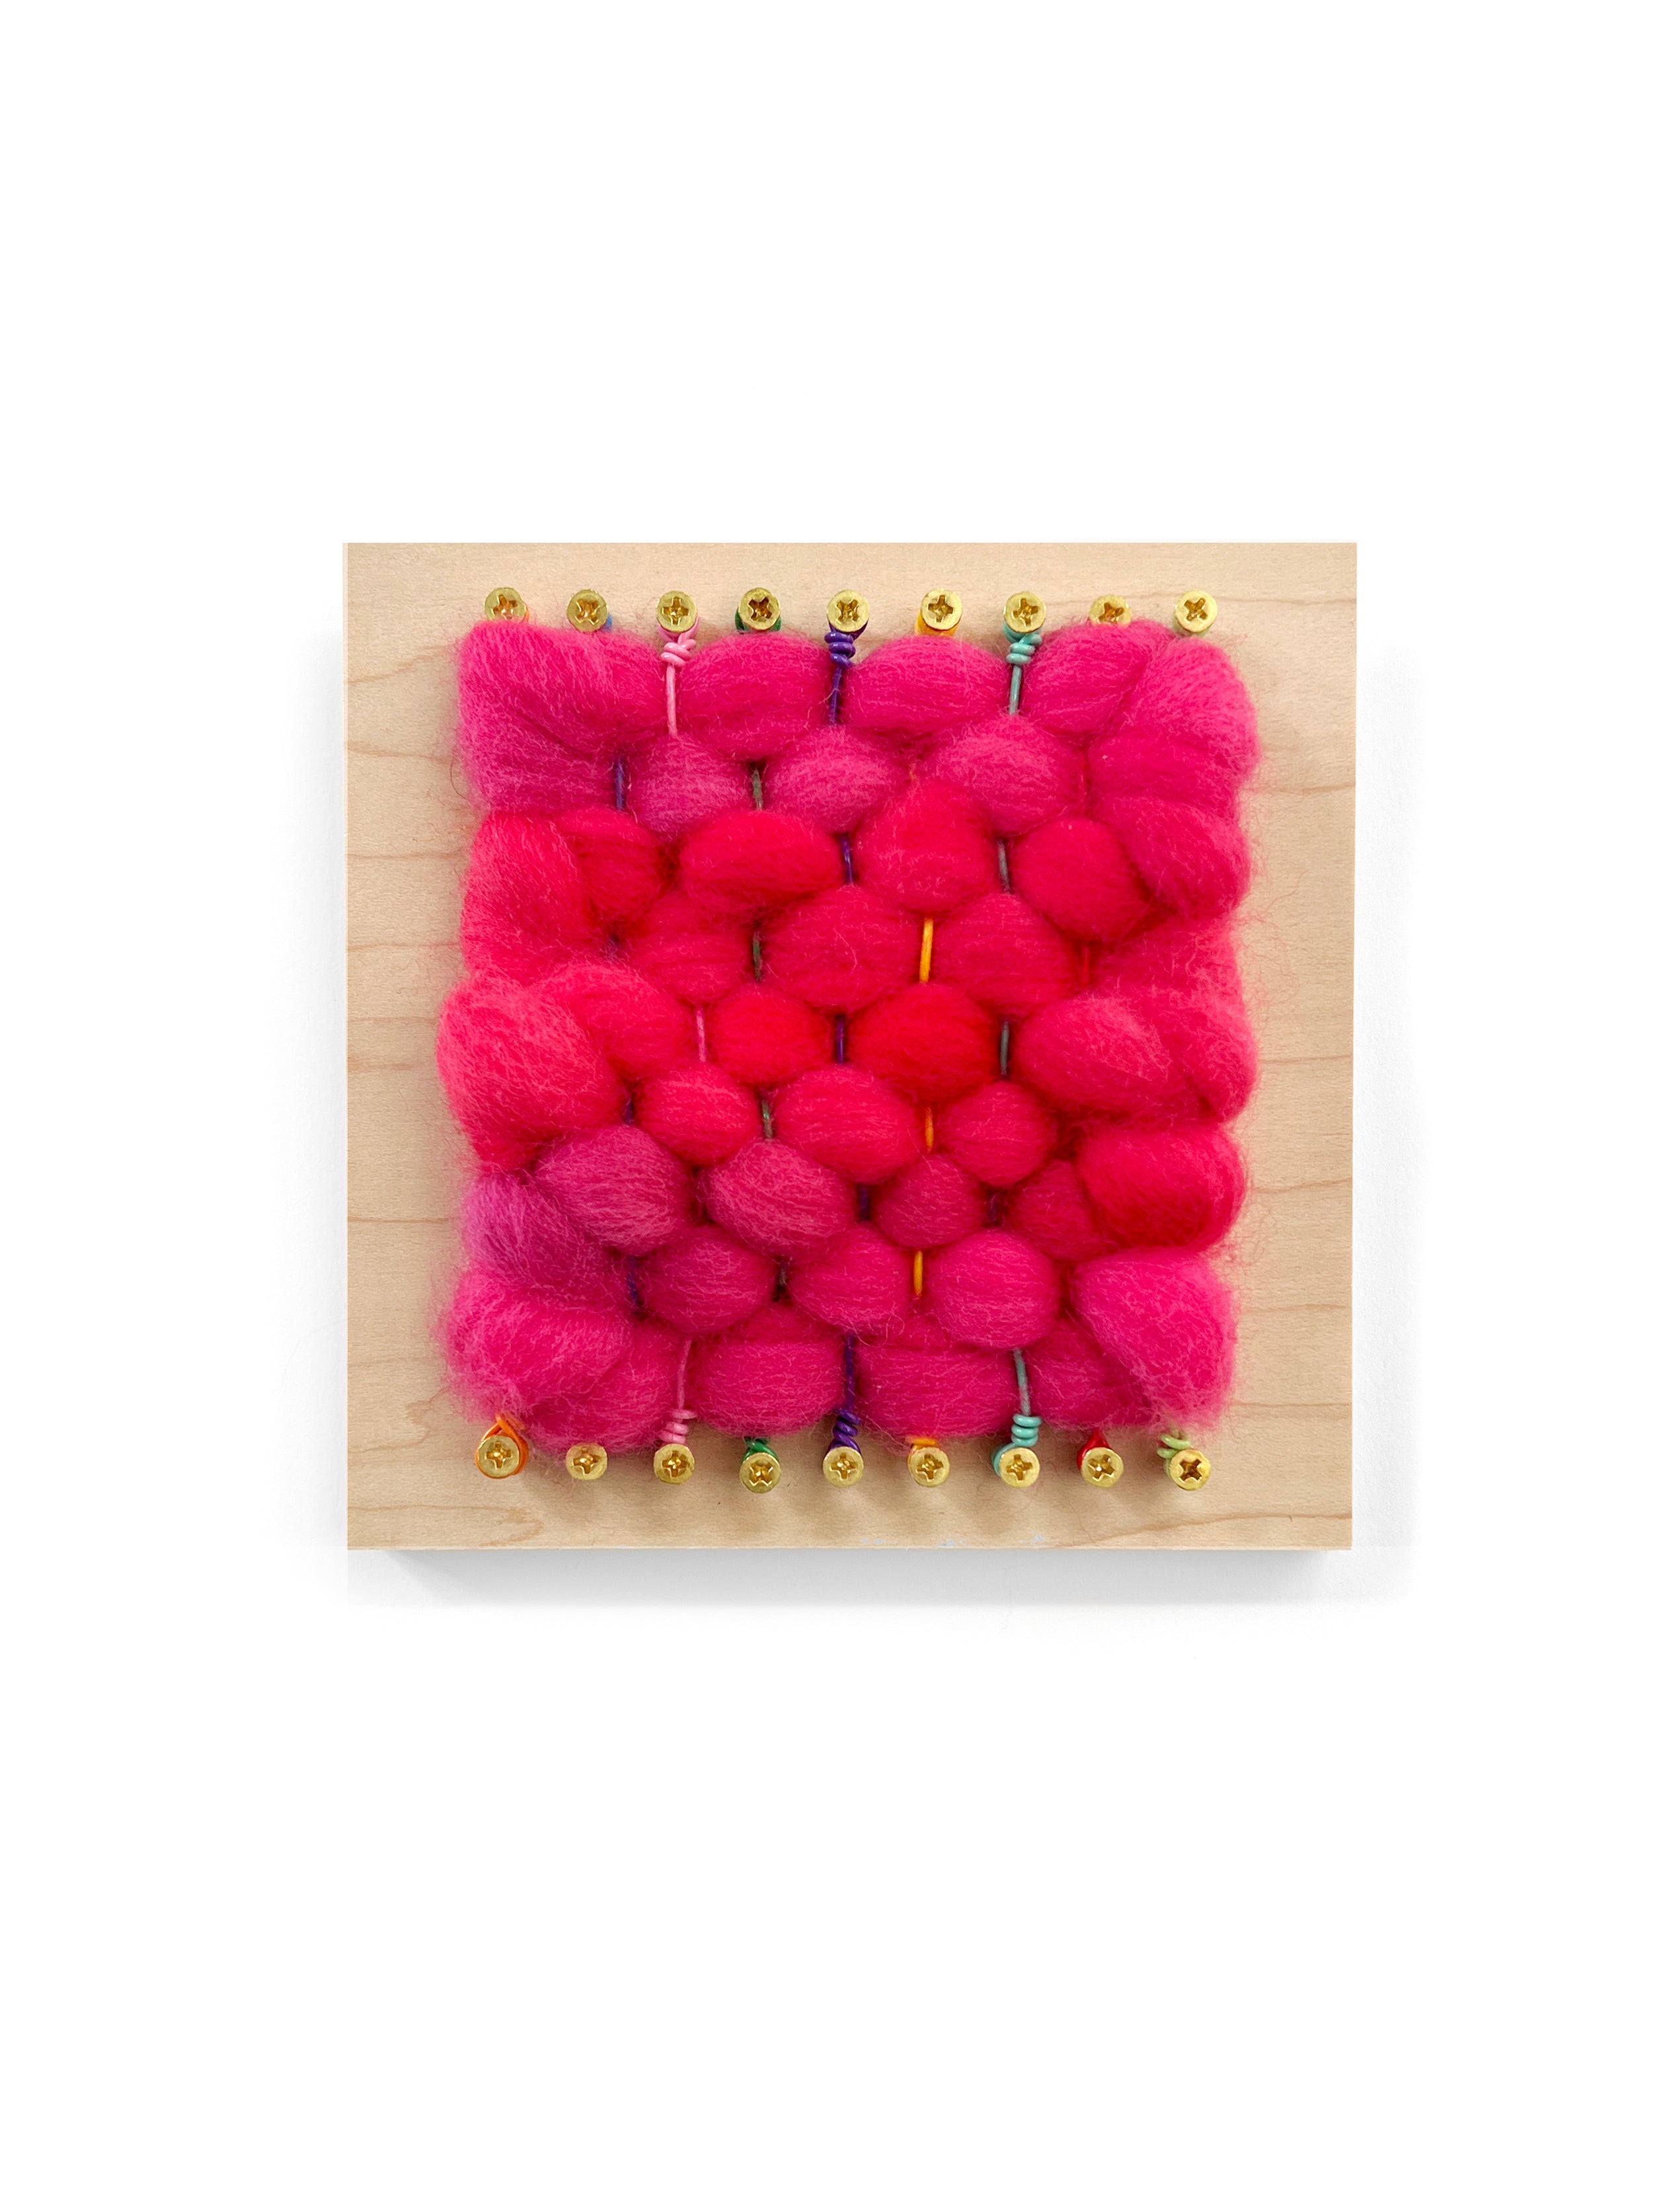 Original bright colorful wall art piece on 6x6 inch wood base with pink woven wool